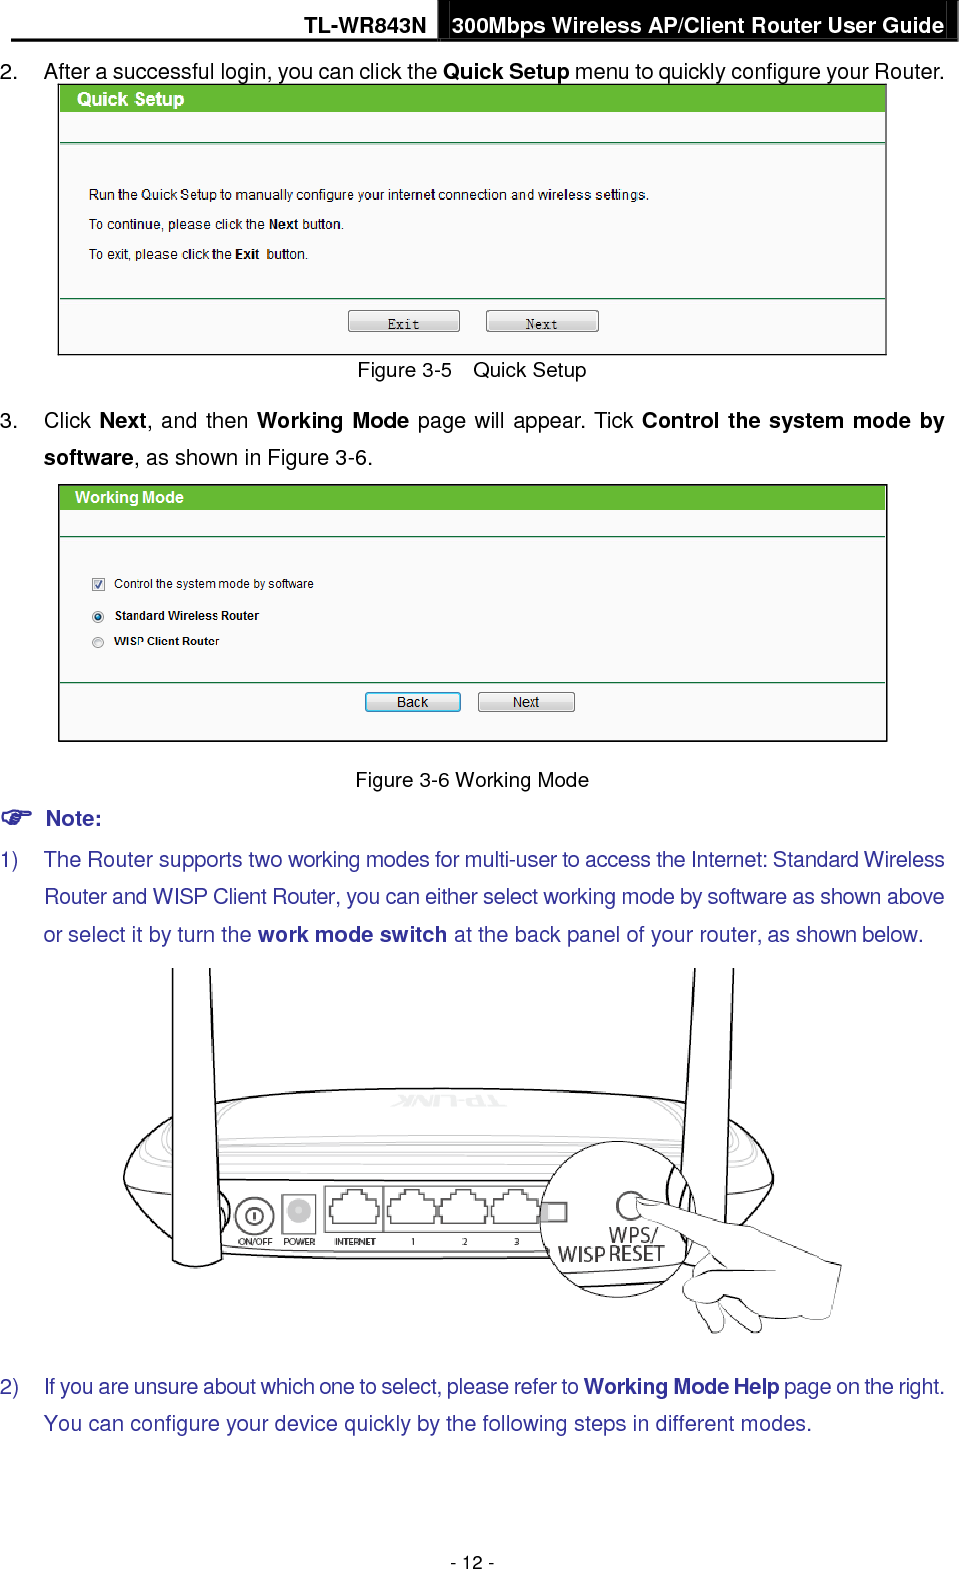 TL-WR843N 300Mbps Wireless AP/Client Router User Guide - 12 - 2. After a successful login, you can click the Quick Setup menu to quickly configure your Router.Figure 3-5    Quick Setup 3. Click Next, and then Working Mode page will appear. Tick Control the system mode bysoftware, as shown in Figure 3-6.Figure 3-6 Working Mode  Note:1) The Router supports two working modes for multi-user to access the Internet: Standard Wireless Router and WISP Client Router, you can either select working mode by software as shown aboveor select it by turn the work mode switch at the back panel of your router, as shown below.2) If you are unsure about which one to select, please refer to Working Mode Help page on the right.You can configure your device quickly by the following steps in different modes.